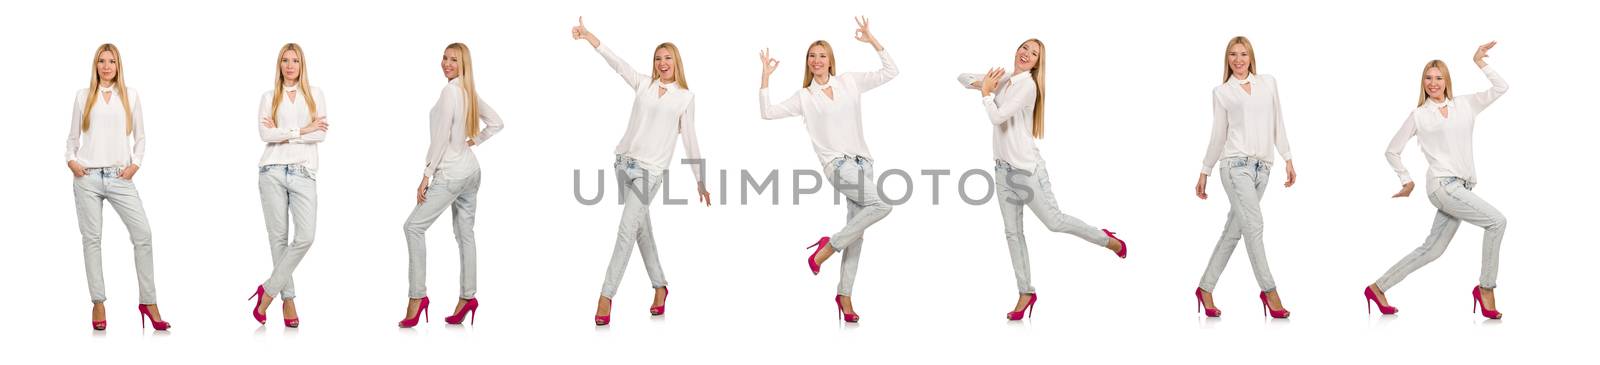 Pretty woman in blue jeans isolated on white